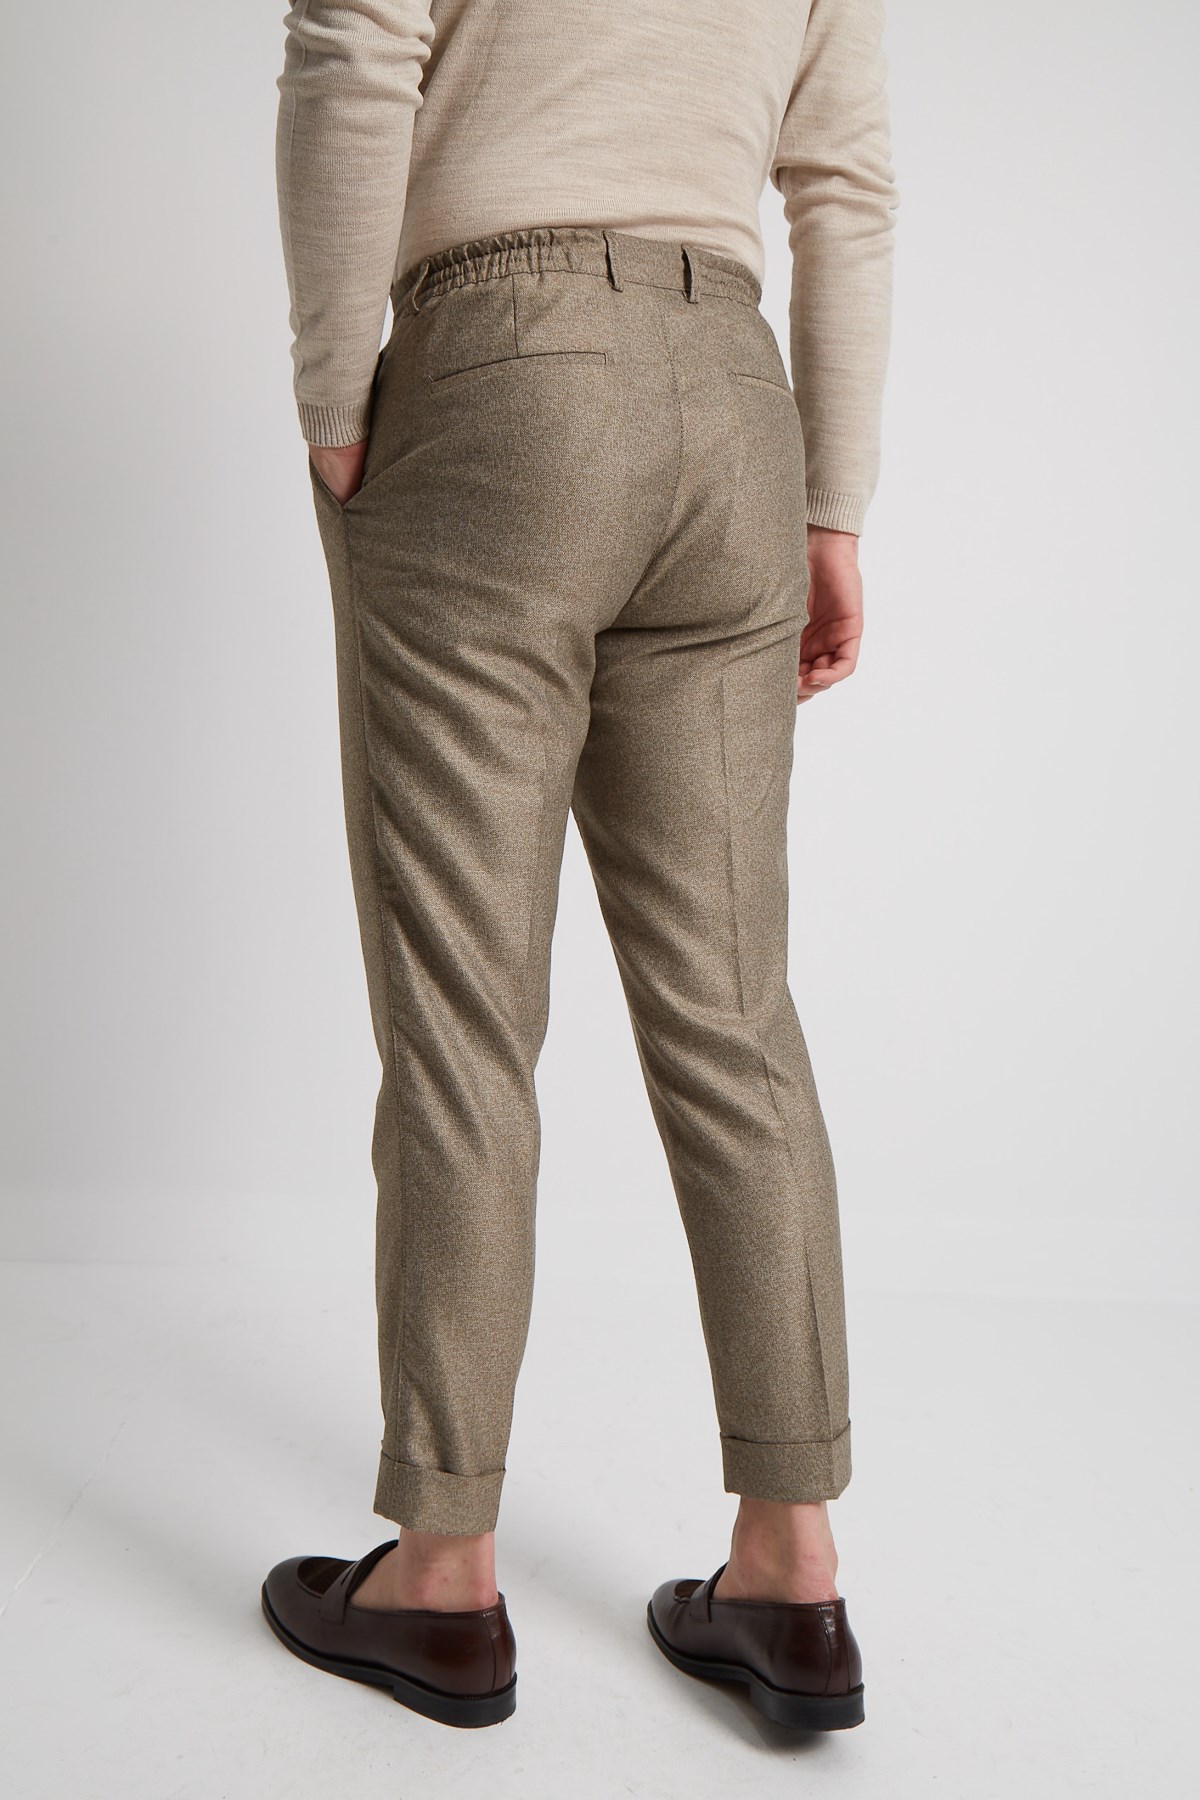 BROWN CARROT PATTERN TIED AT THE WAIST PLEATED DOUBLE CUFF TROUSER